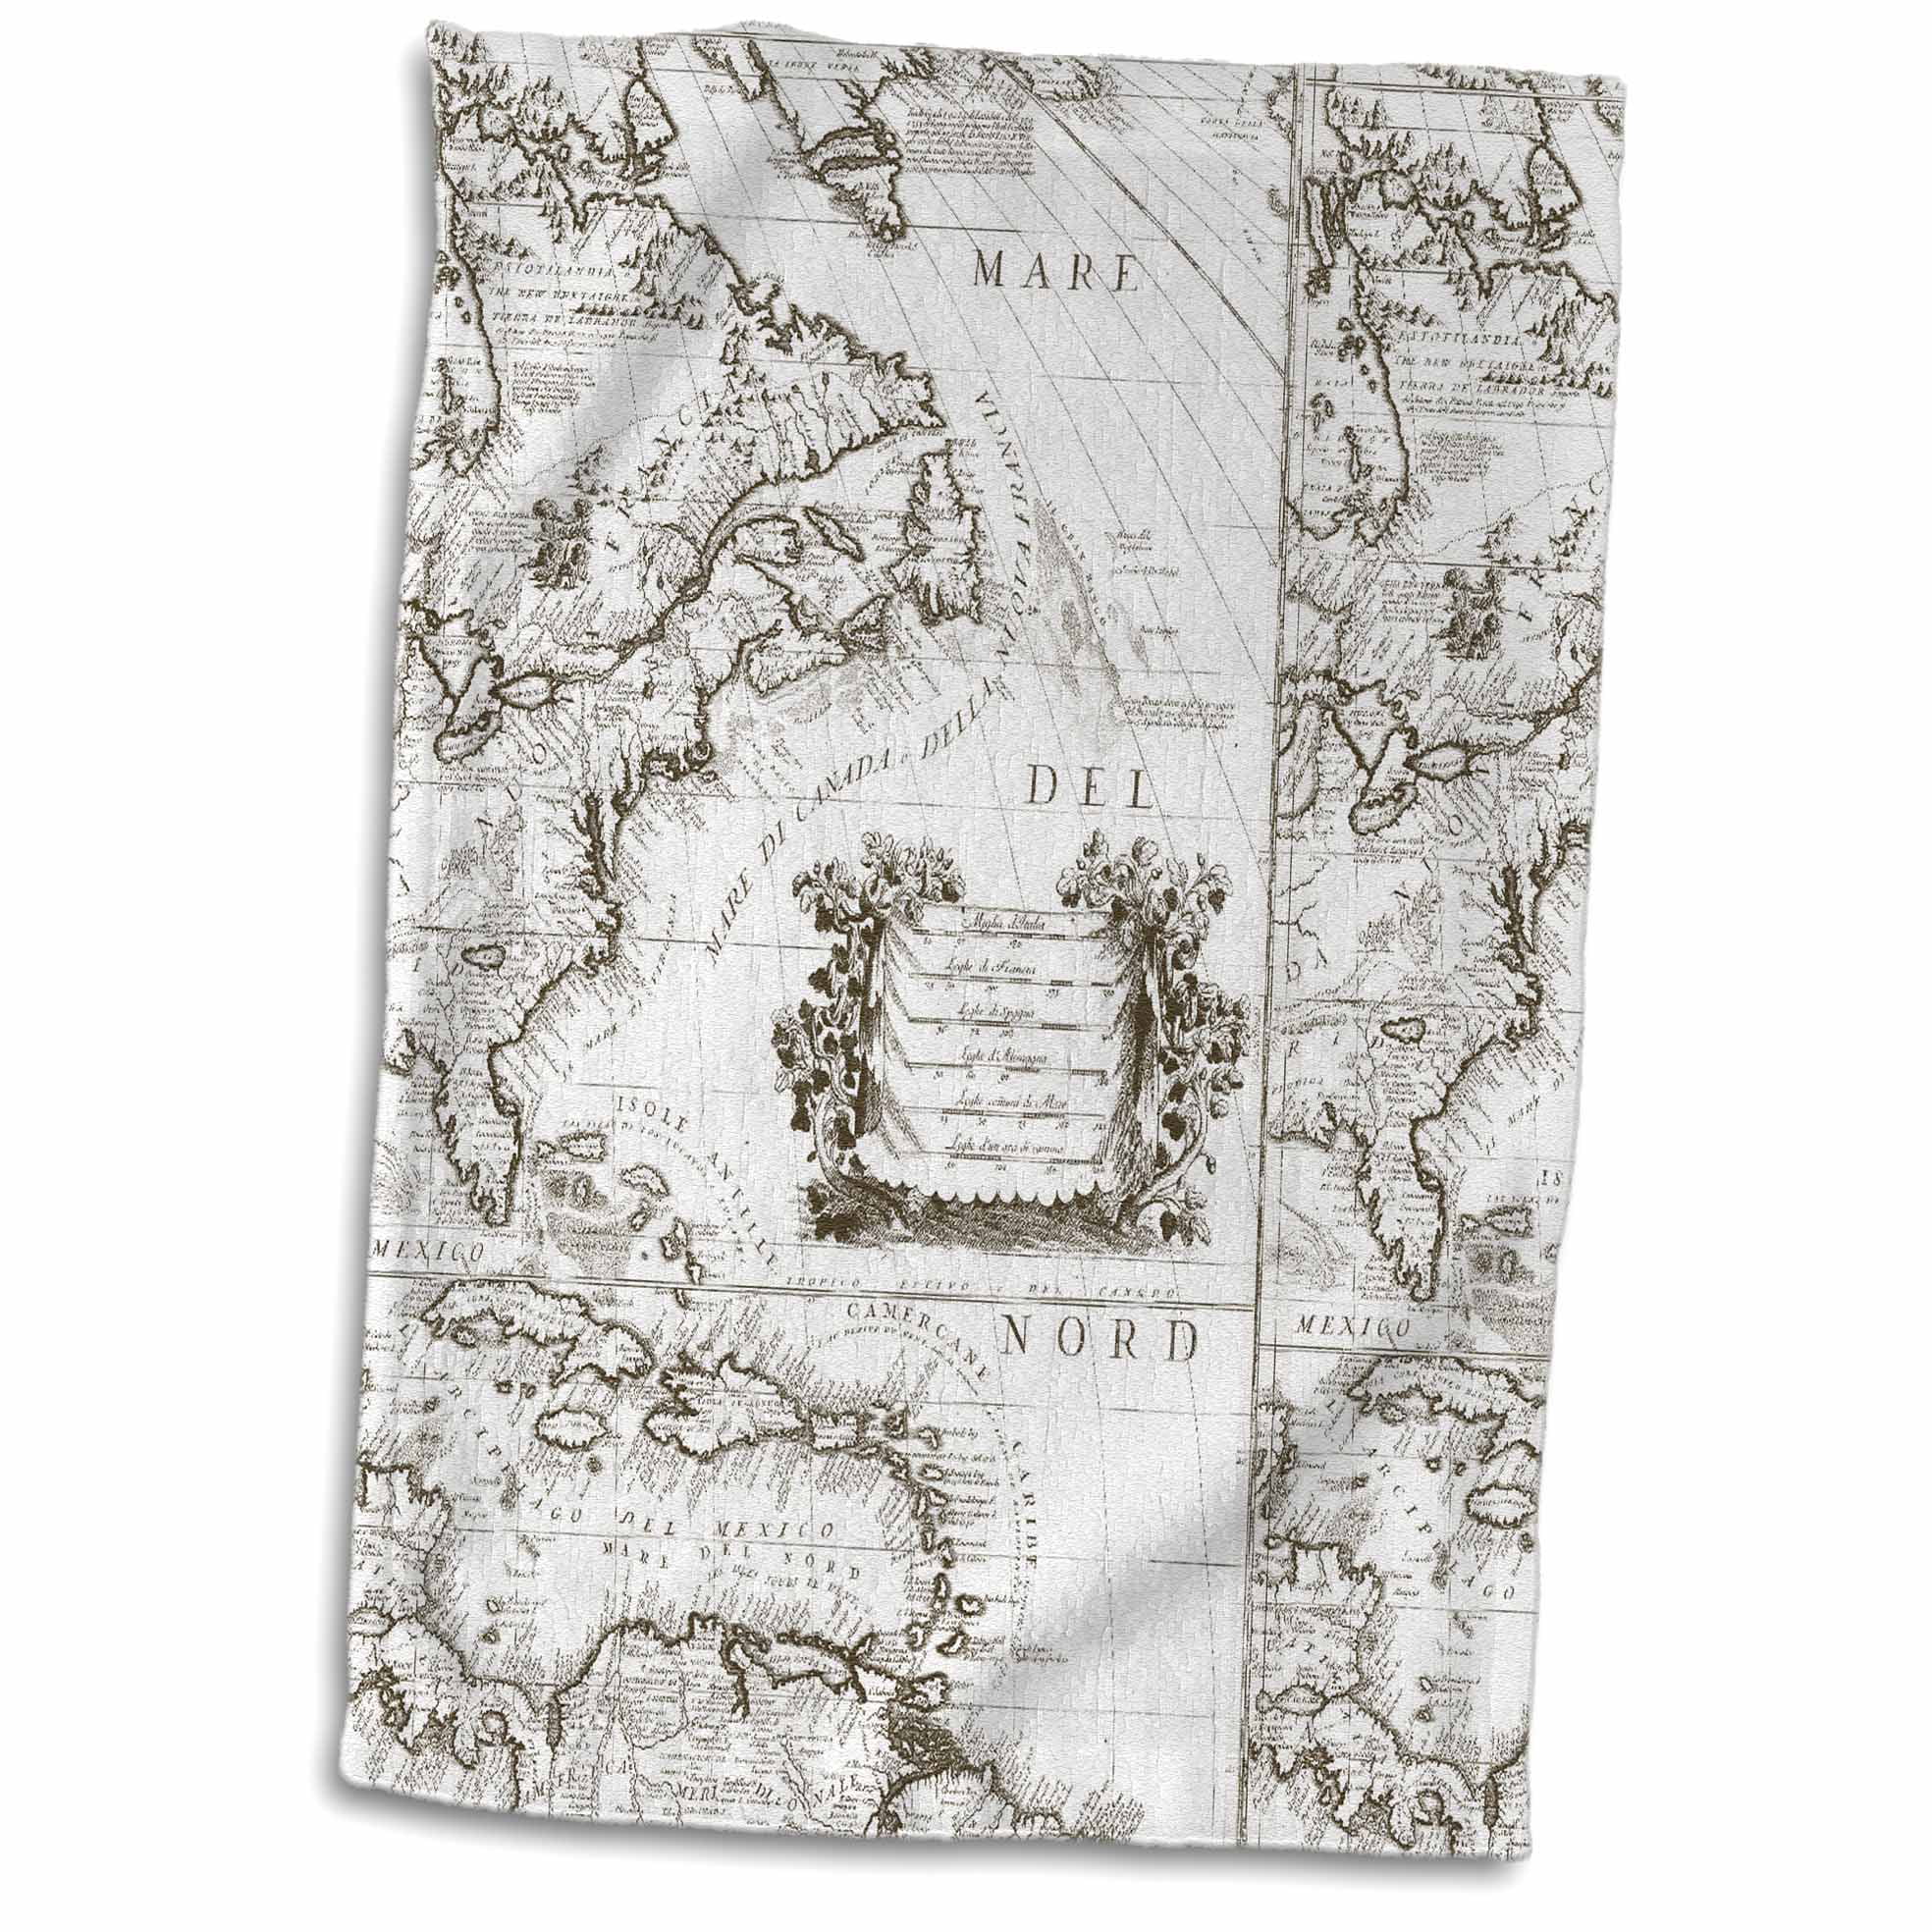 3D Rose an Antique Map The World in Brown Towel 15 x 22 